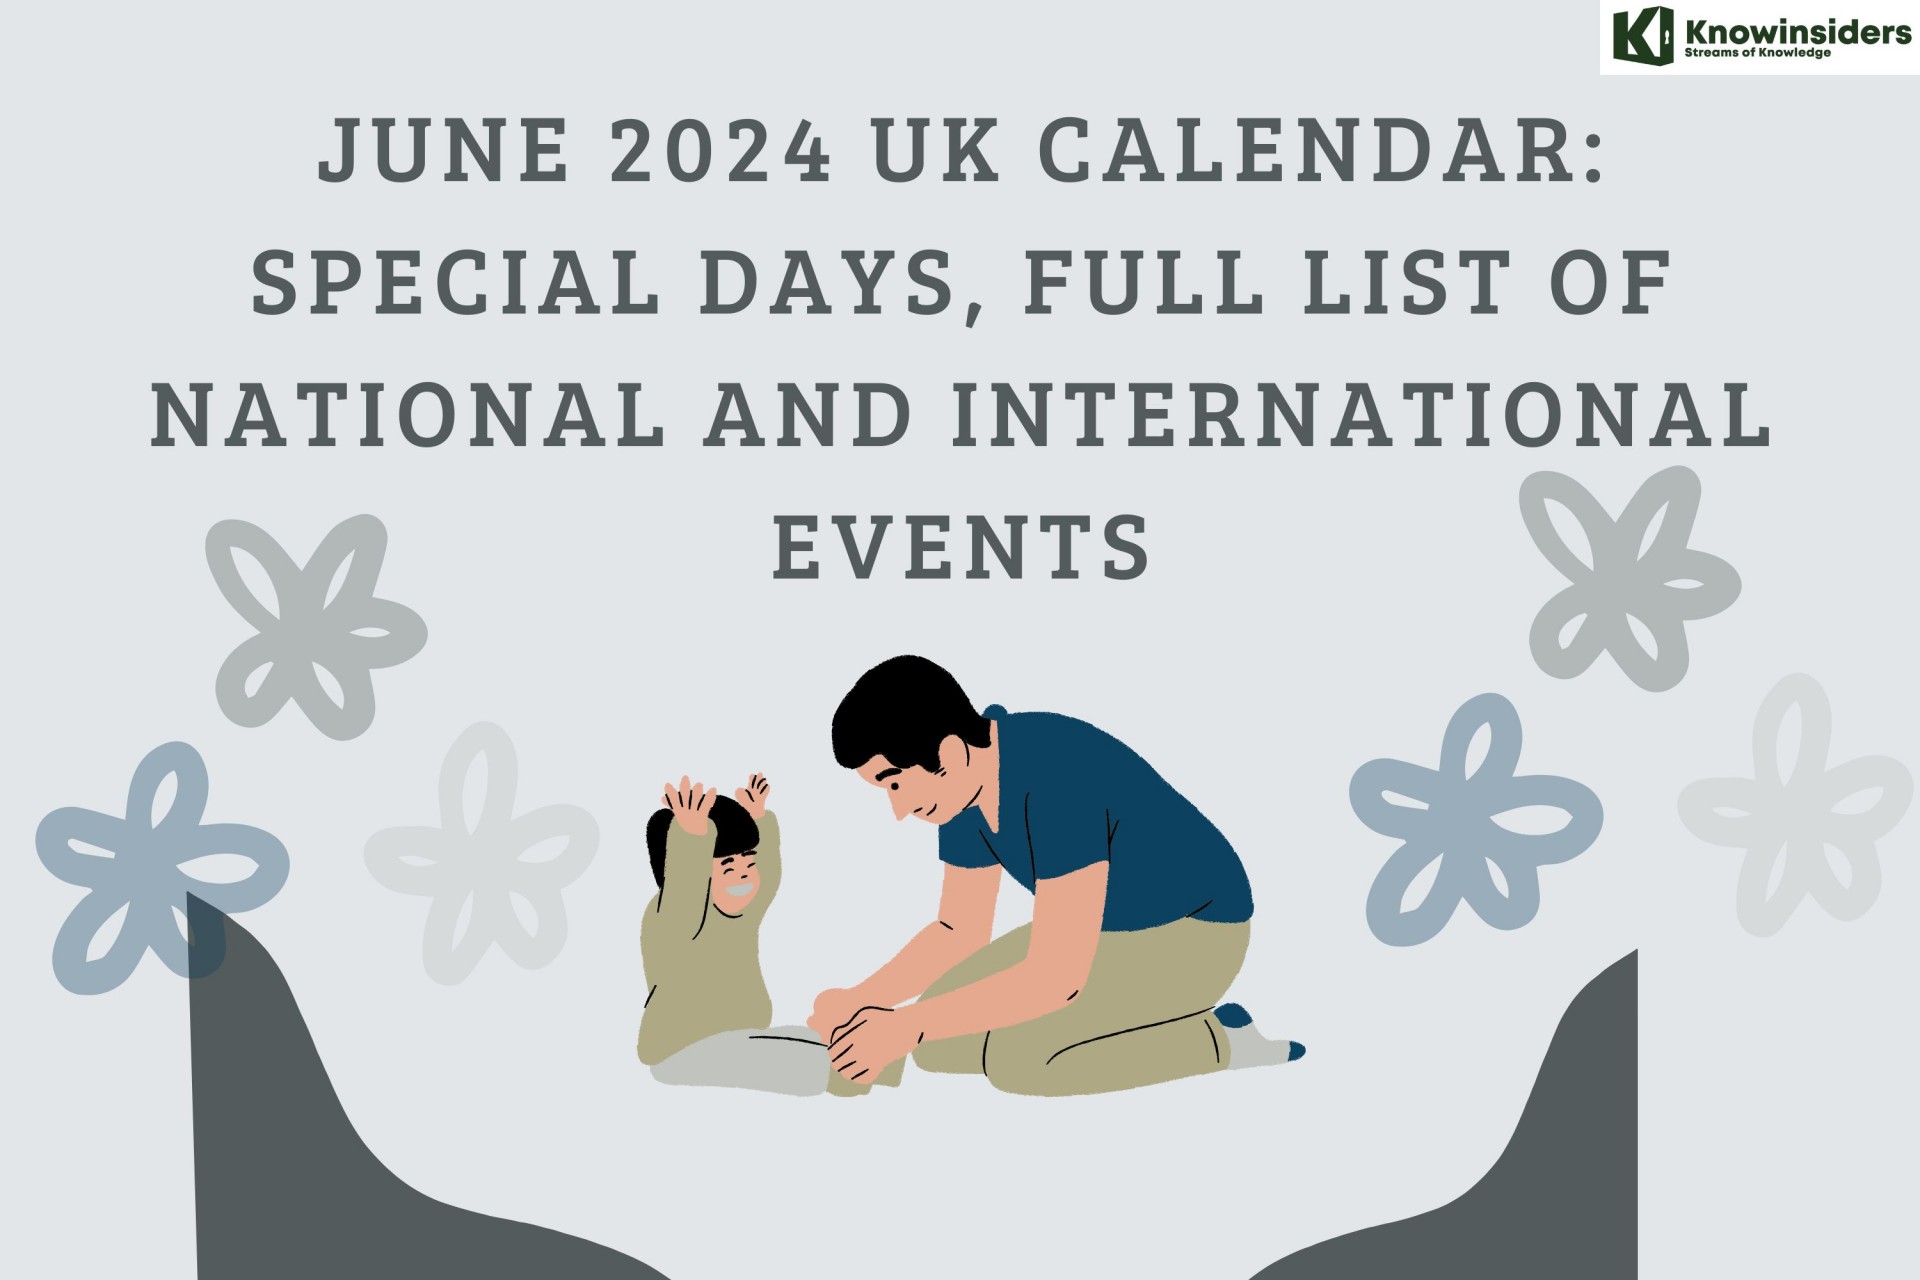 June 2024 UK Calendar: Special Days, Full List of National and International Events